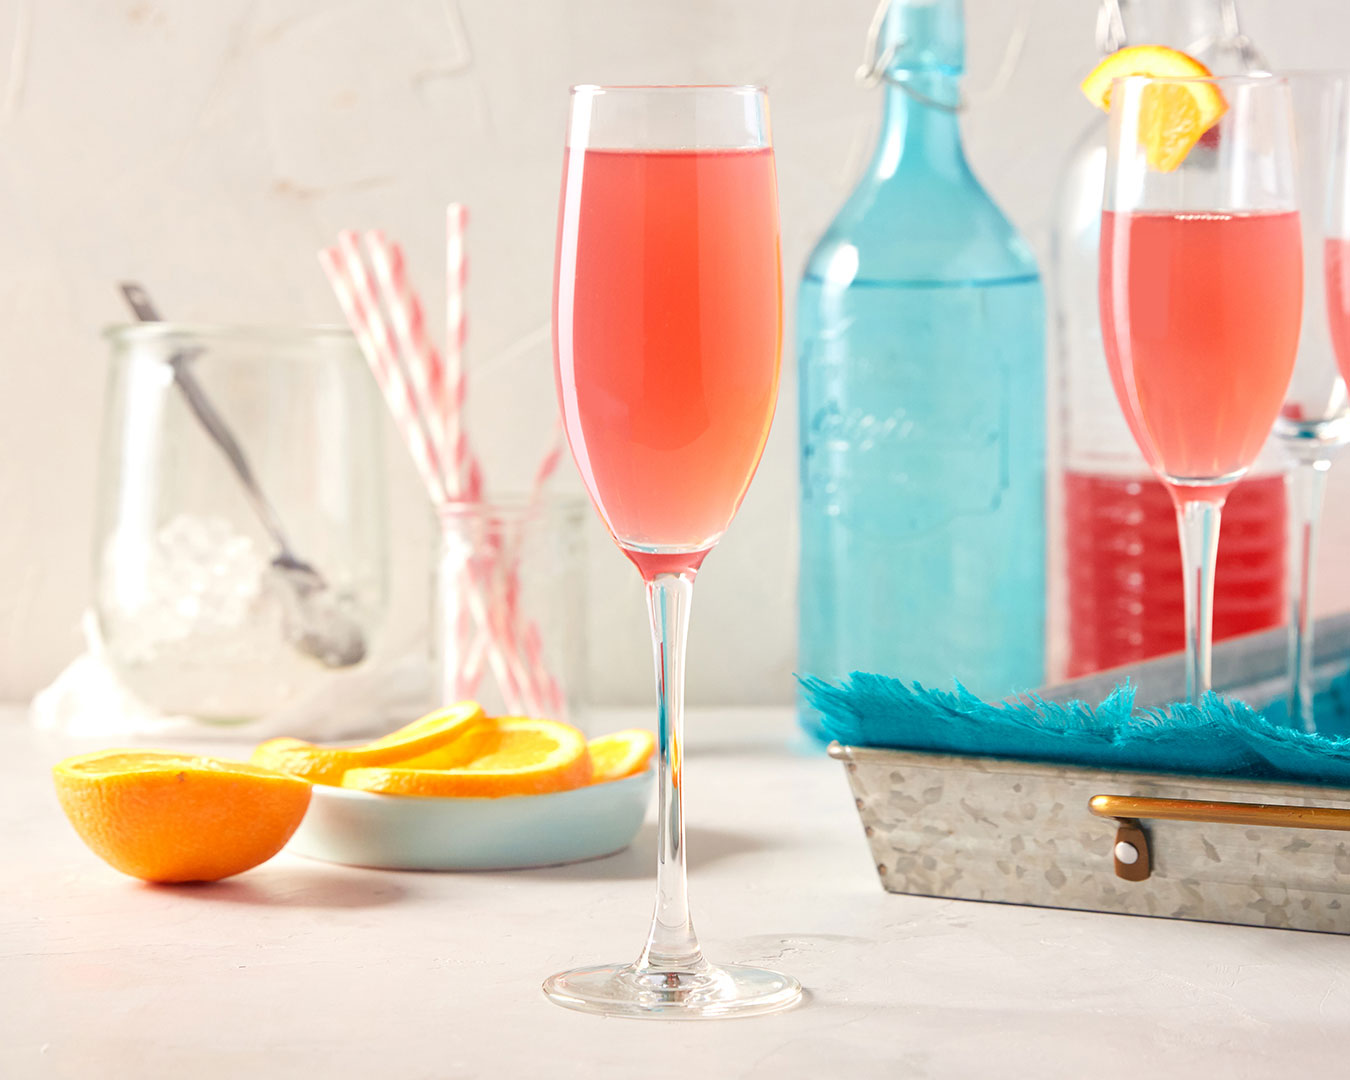 Pink drink with tray, oranges, and straws in background, photographed by Kate Benson, professional food and beverage photographer.